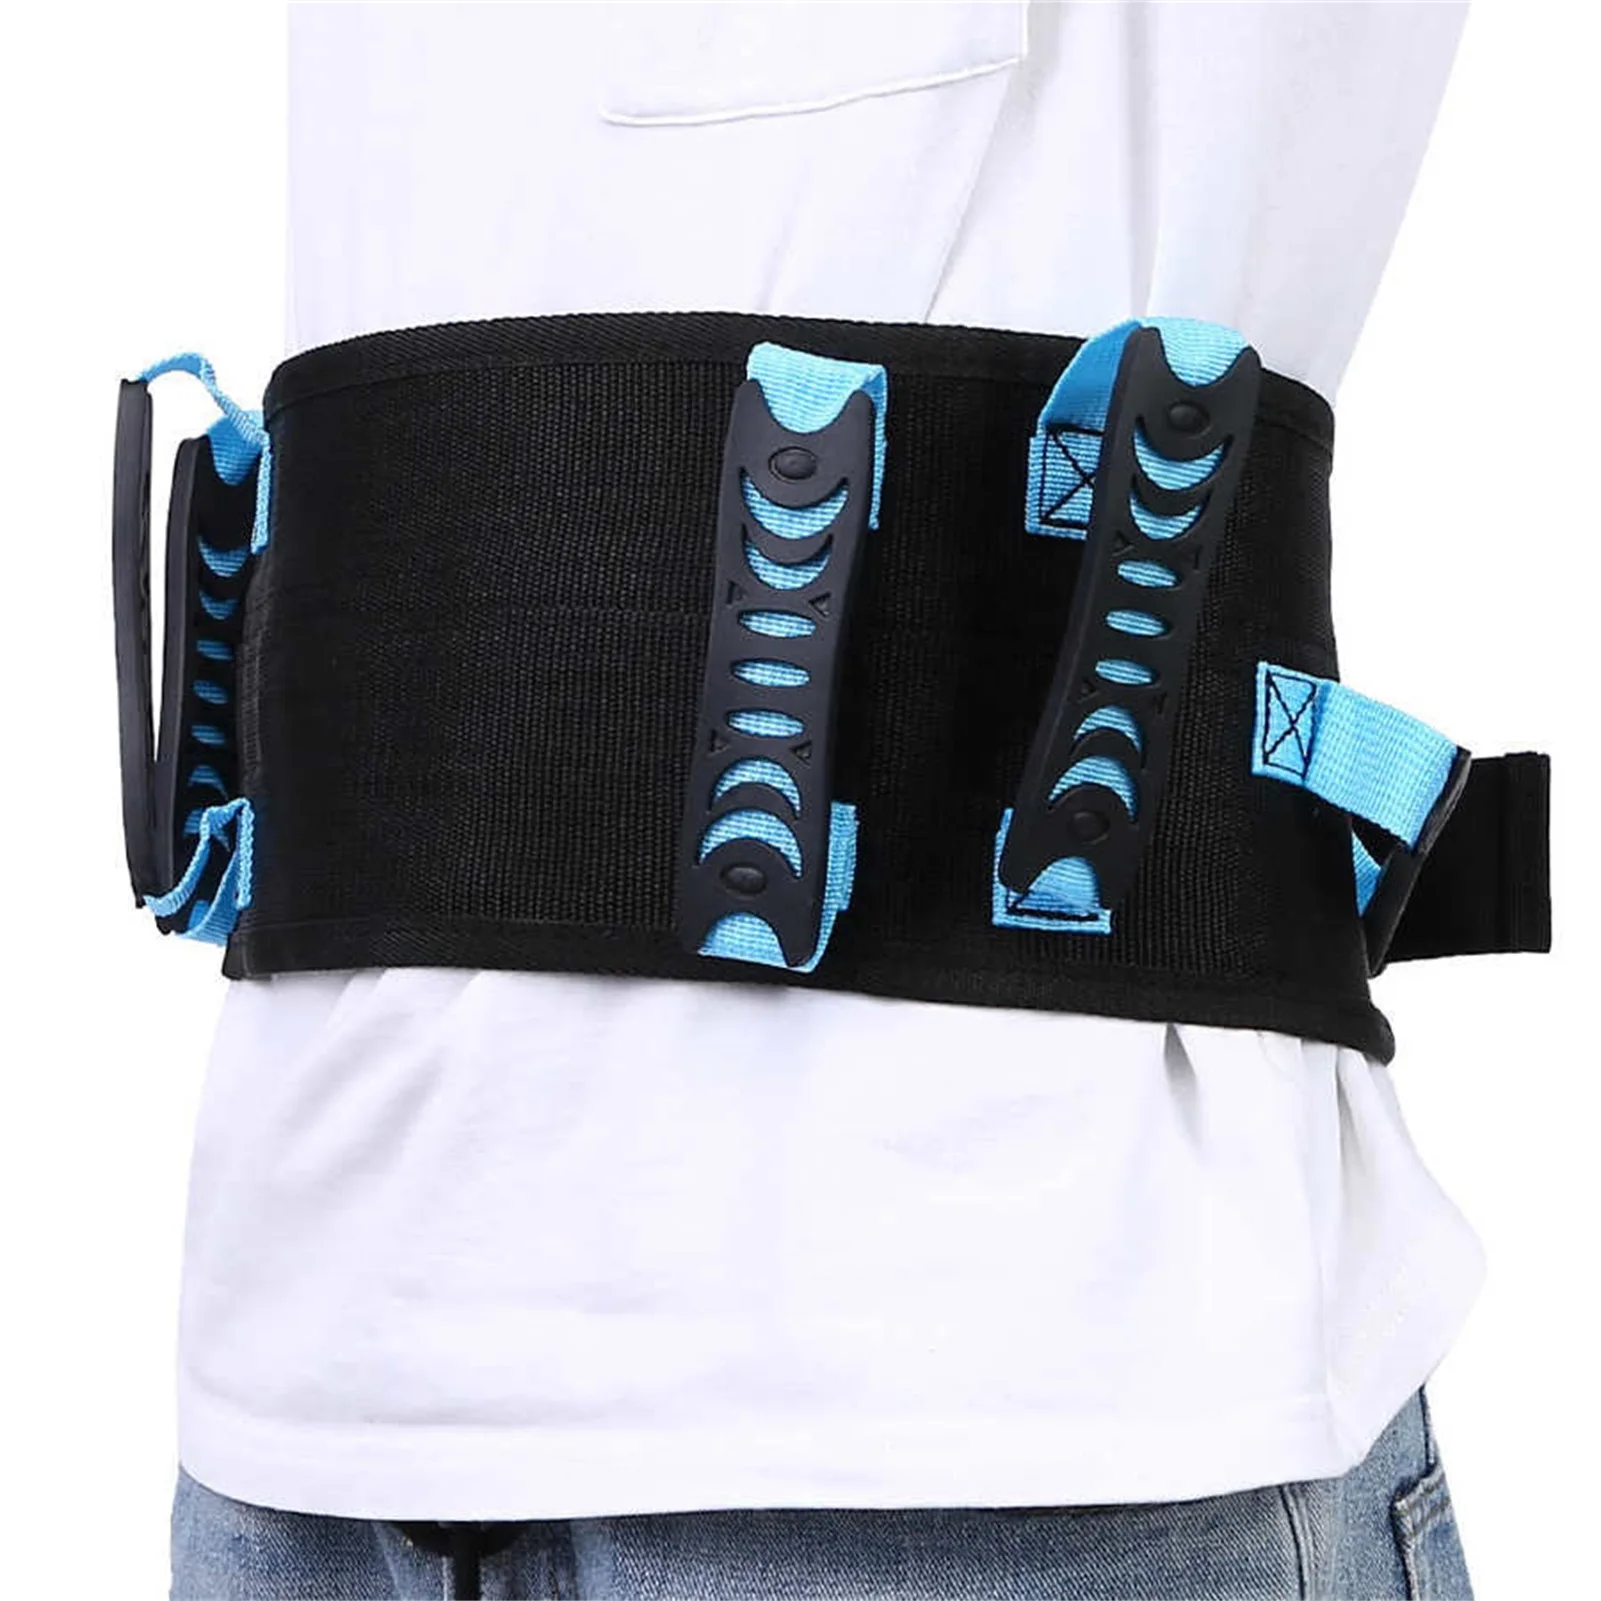 

Gait Belt Transfer Sling Padded Assist Gait Belt Patient Lift With Straps Mobility Standing And Lifting Aid For Disabled Elderly